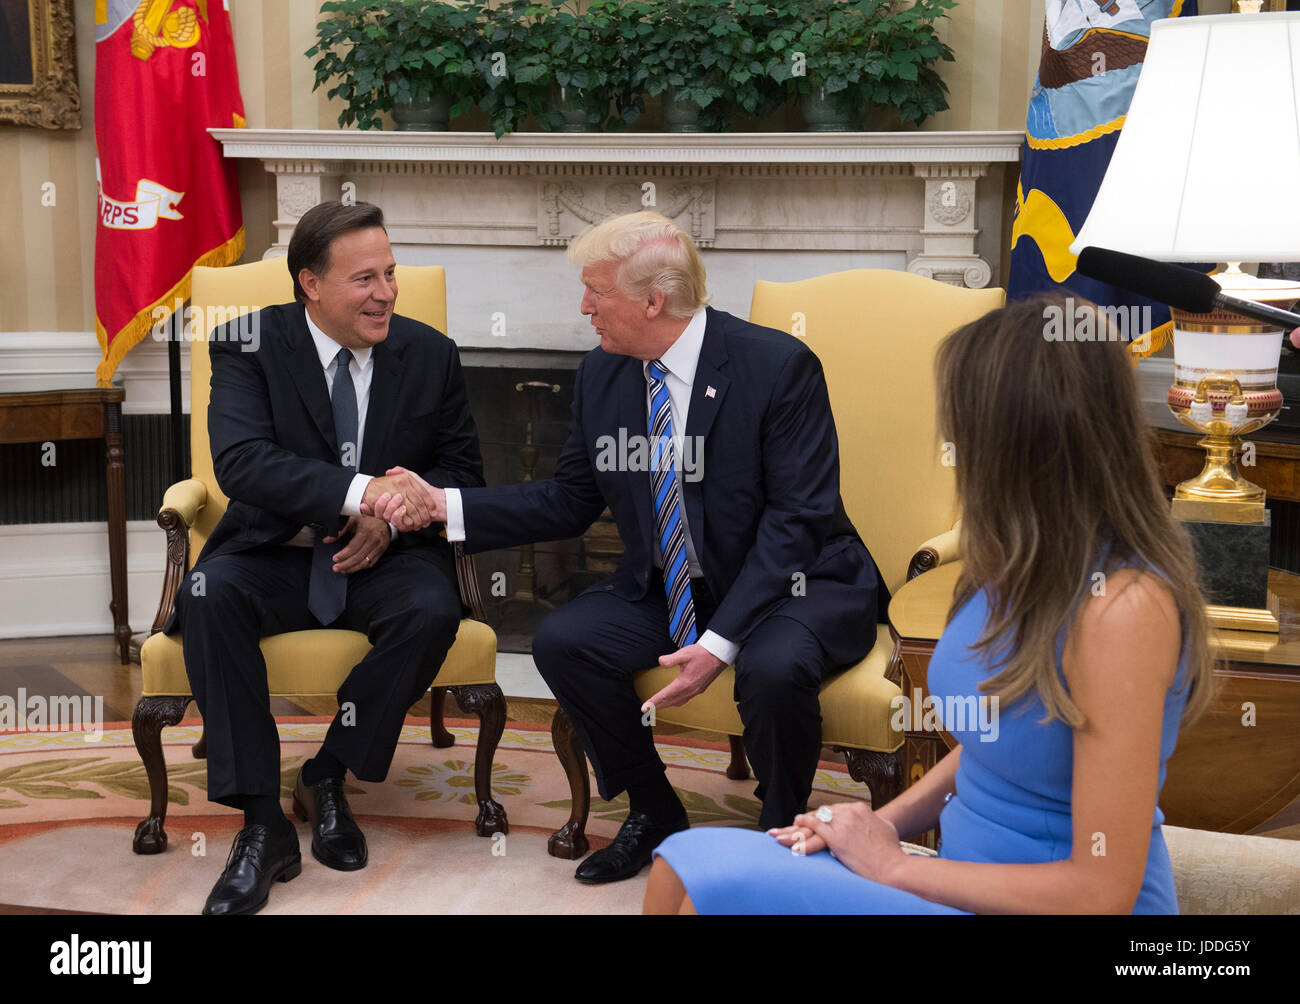 Washington DC, USA. 19th June, 2017. United States President Donald J. Trump shakes hands with President Juan Carlos Varela of Panama in the Oval Office of the White House in Washington, DC on June 19, 2017. First lady Melania Trump is at right. Credit: Molly Riley/CNP /MediaPunch/Alamy Live News Stock Photo